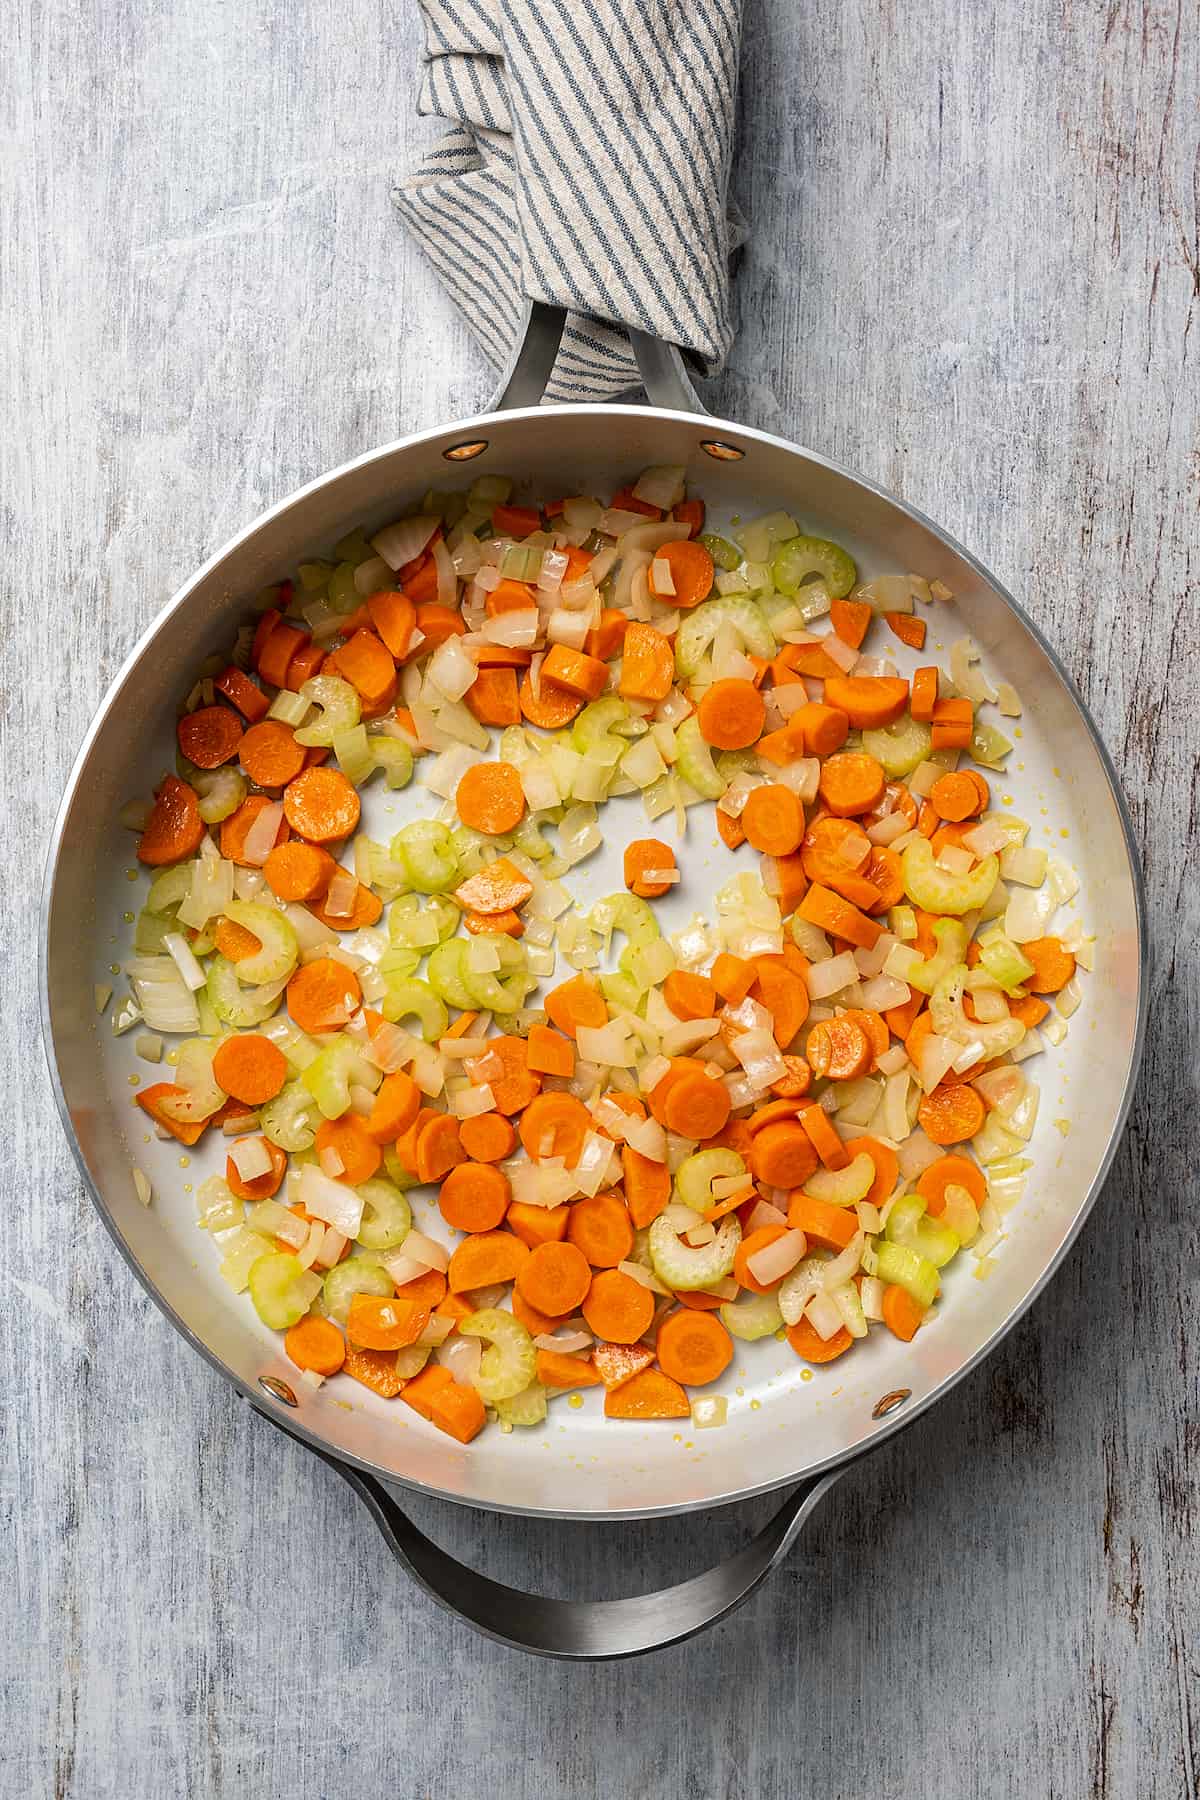 Carrots, onions, and celery cooking in a large skillet.